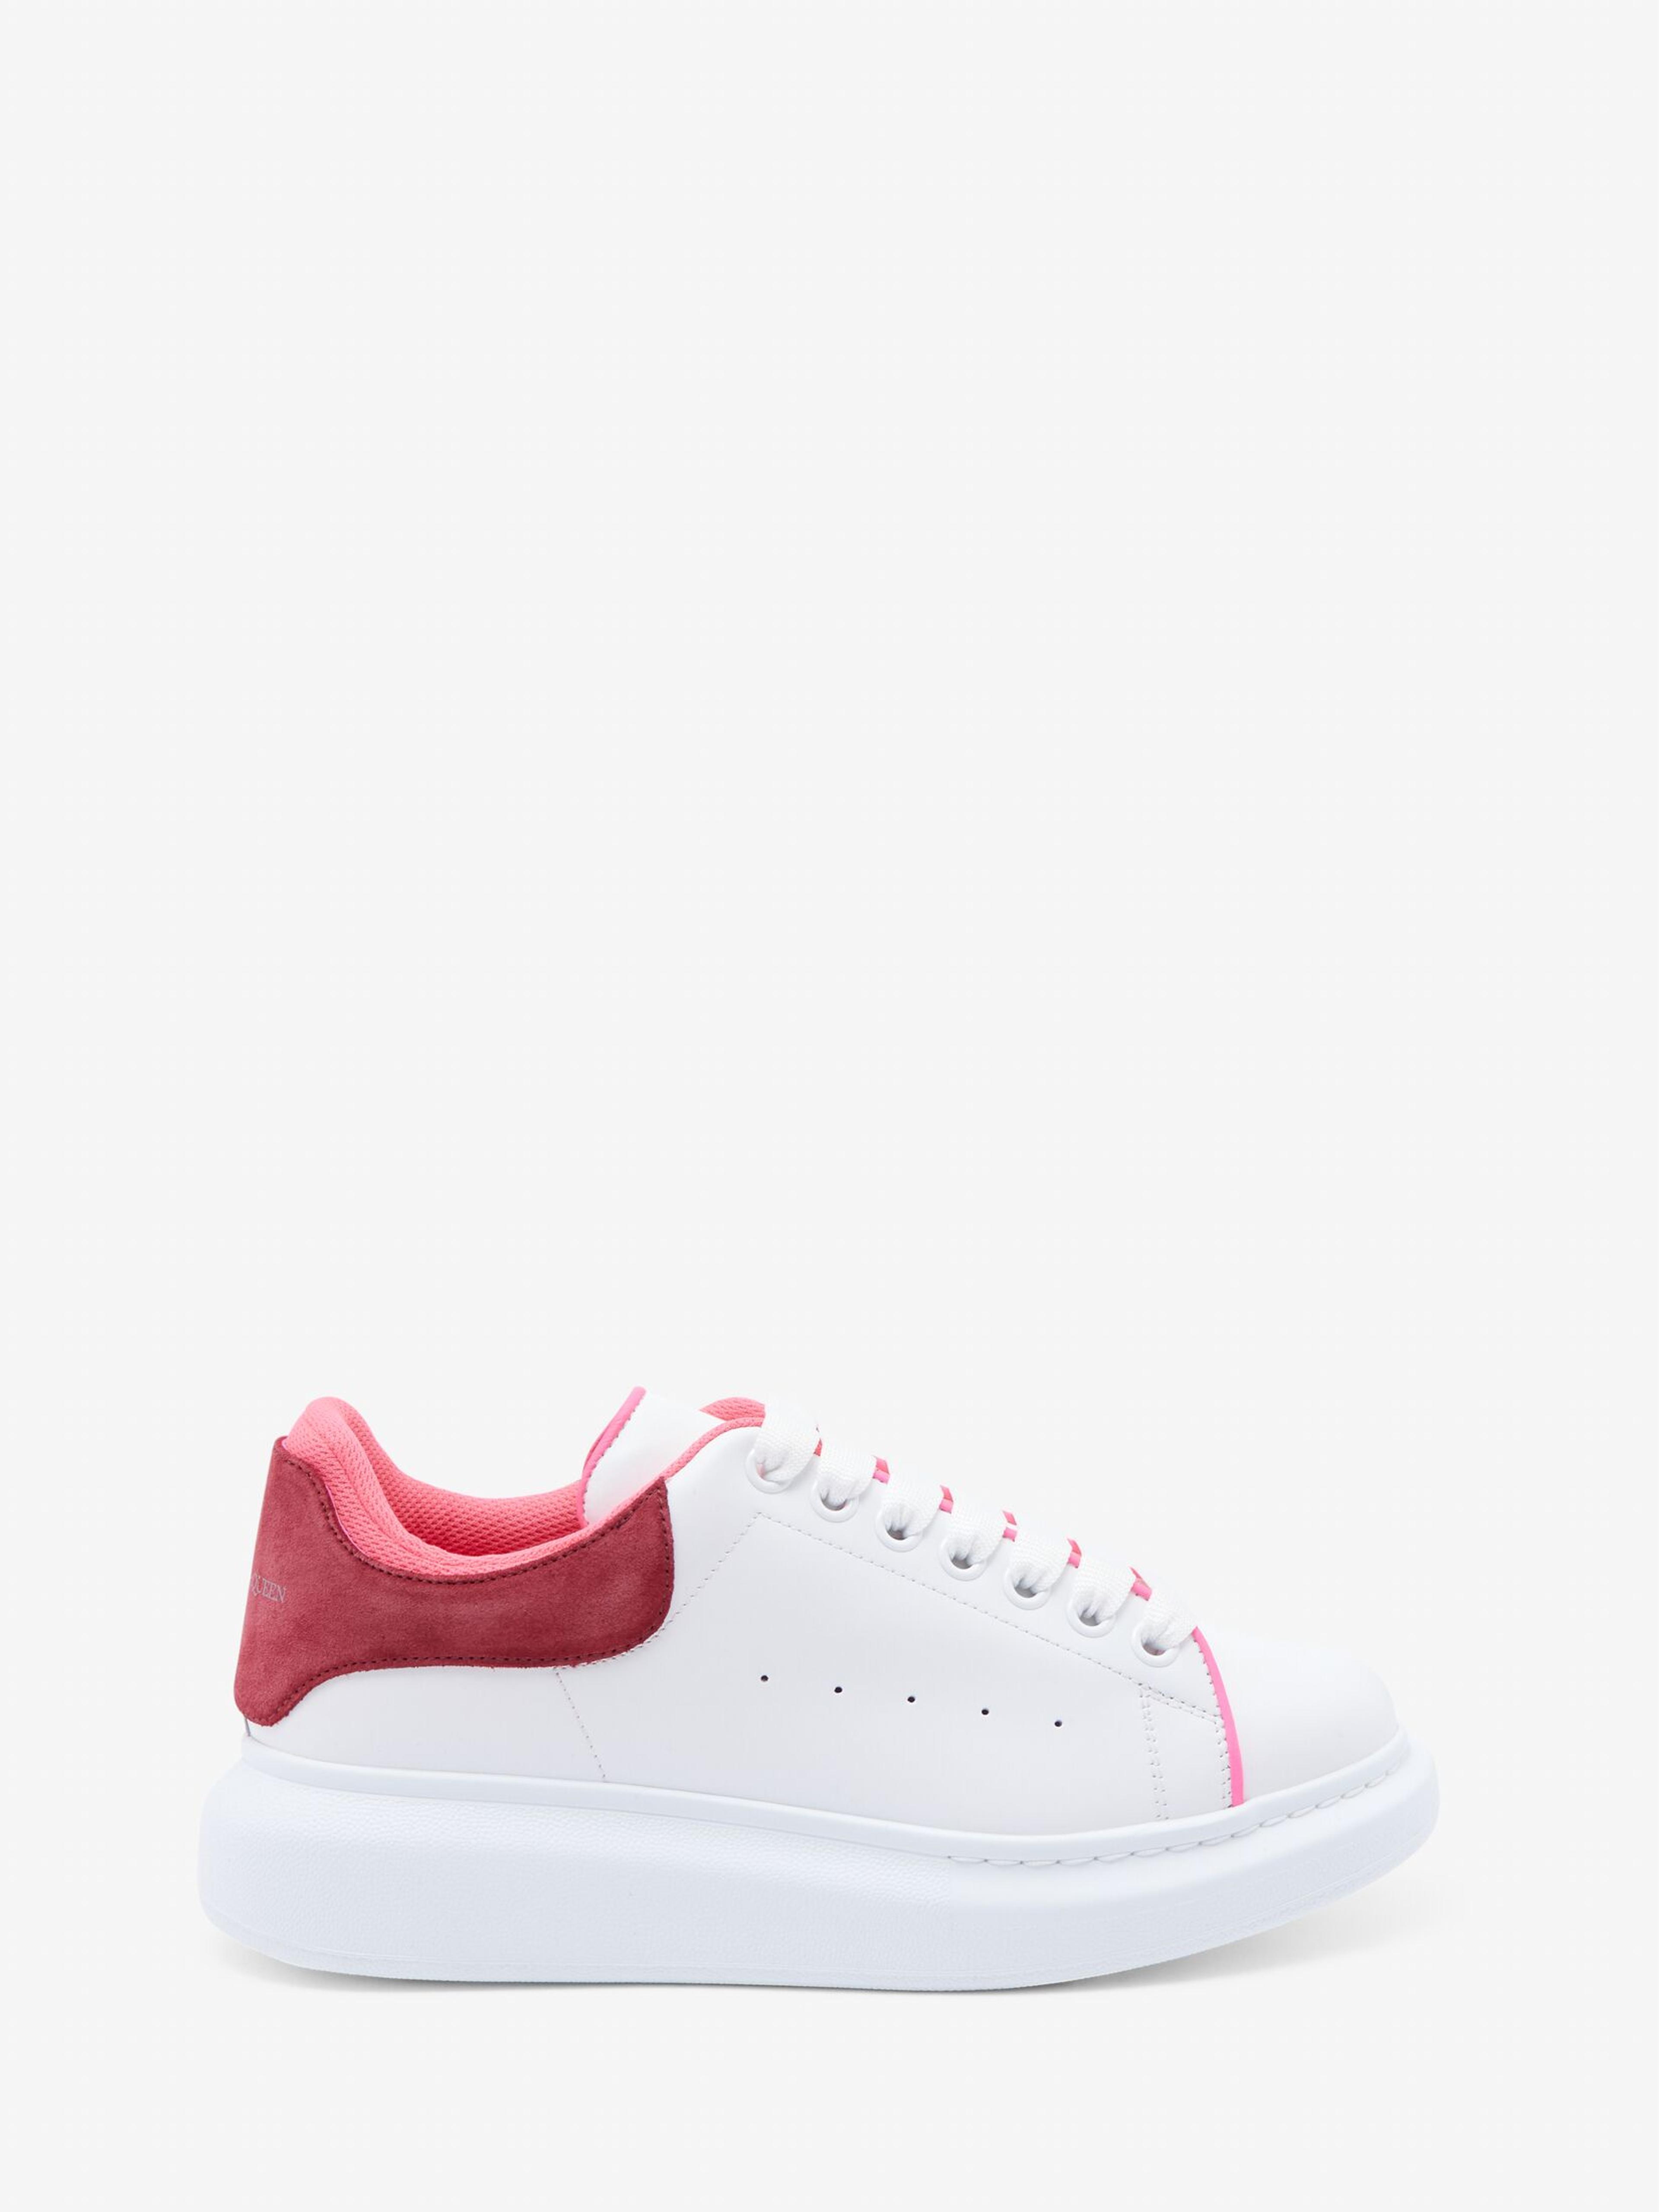 Oversized Sneaker in White/Red/Halo Pink | Alexander McQueen US